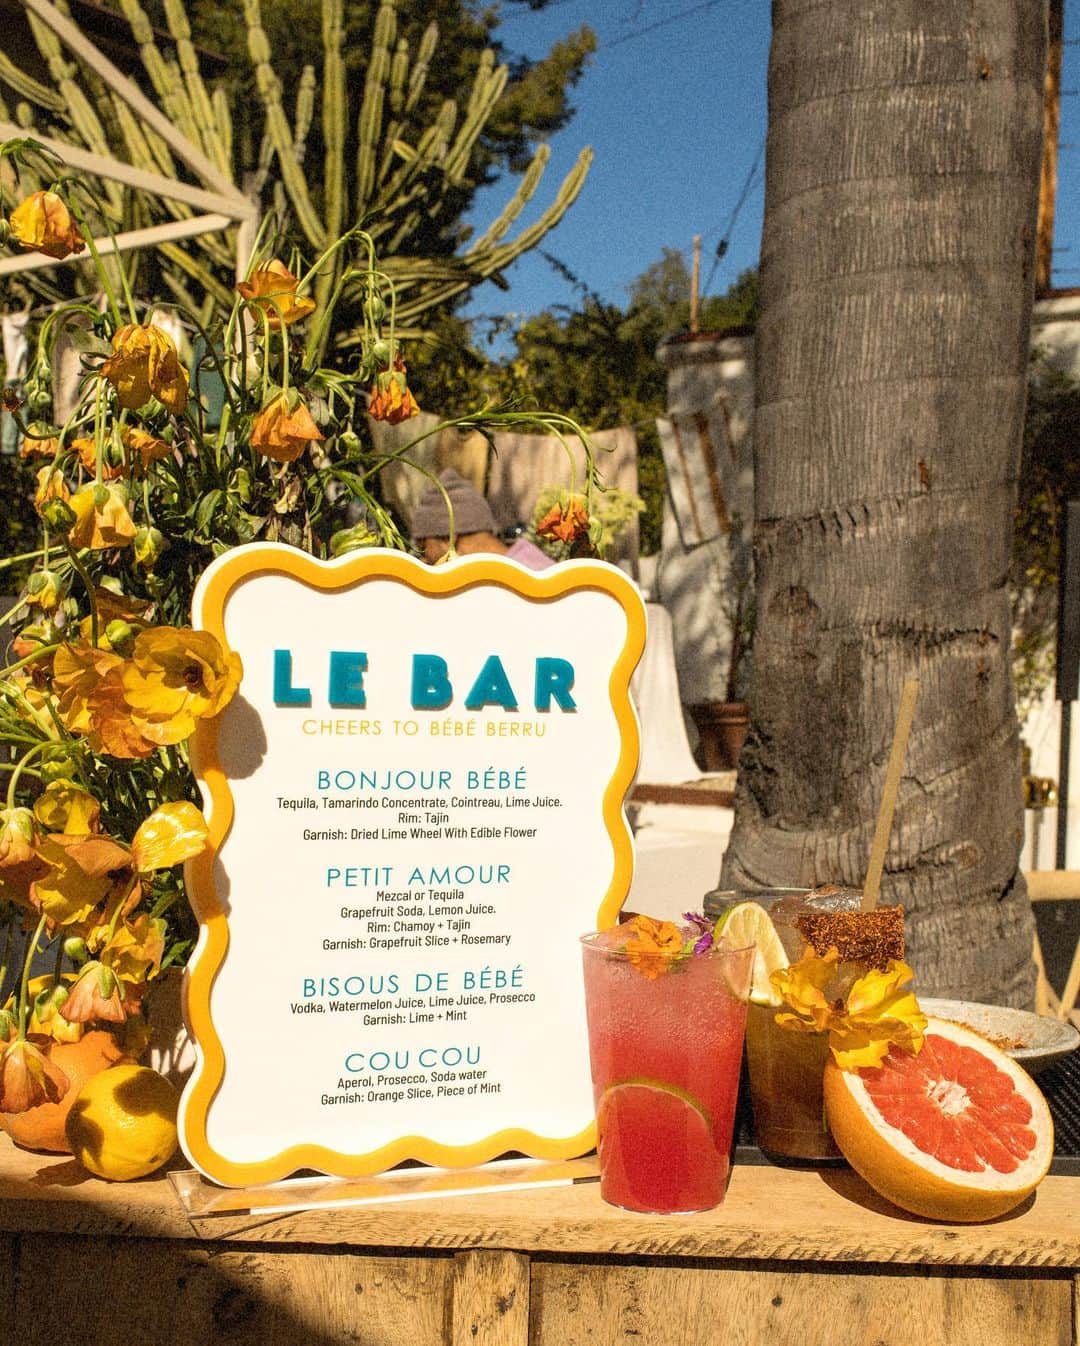 ジュリー・サリニャーナさんのインスタグラム写真 - (ジュリー・サリニャーナInstagram)「BABY SHOWER FOOD & BAR details🧡:  We wanted our guests to enjoy feeling like they were in the Mediterranean/French Coastal with decor, food & styling as well as bringing in some touches of Mexico! It was so fun to put the menu together and everyone raved about how yummy the food was! Of course I had to have my fave food catering company @urbanpalatela for this special shower and can’t tell you how insanely gooood everything tasted and how beautiful the presentation was plus the staff was the icing on the cake! fun fact: they catered my big 30th birthday party! So they’ve done all my special milestones- they’re amazing!)   A few things on the menu were: Appetizers:  * Chicken confit sopes with mole, black bean crema, pickled red onion * Santa Barbara seabass ceviche, heirloom citrus, avocado, habanero oil  * Tartine station  Buffet  * Orecchiette pasta with Arugula pistou, grilled asparagus, fava beans, English peas, Meyer lemon, chèvre * Grilled skirt steak with guajillo spice, cilantro lime gremalota x  potatoes * Pan Seared branzino, roasted baby heirloom tomatoes, rosemary , roasted garlic oil  For the bar, we had tailored drinks made by the sweet girls from @martinigirls which were so refreshing and so good! They’ve also done a few of our parties and they’re the best! We also had aguas frescas because I’m obsessed with having fresh juices- we had Watermelon x Pineapple with Spinach! 🍉  For the furniture & dishware, our good friends from @berbereimports helped bring our vision to life! Their pieces are just incredibly stunning- my backyard is all filled with Berbere pots x furniture!   For the framed house around the buffet table, which turned out to be such a focal statement scene, my sister @lilylove213 and brother in law @mucio323 came up w the idea and built it out! It framed that little vignette so perfectly!   For all the floral and table styling; my good friend @dolcetto created such a beautiful, effortless job- I just couldn’t get over how pretty everything looked!   Food: @urbanpalatela  Bar: @martinigirls Frame house: @lilylove213 @mucio323  Furniture x Dishes: @Berbereimports Florals: @Dolcetto   #babyshower #babyshowerideas」4月11日 1時23分 - sincerelyjules